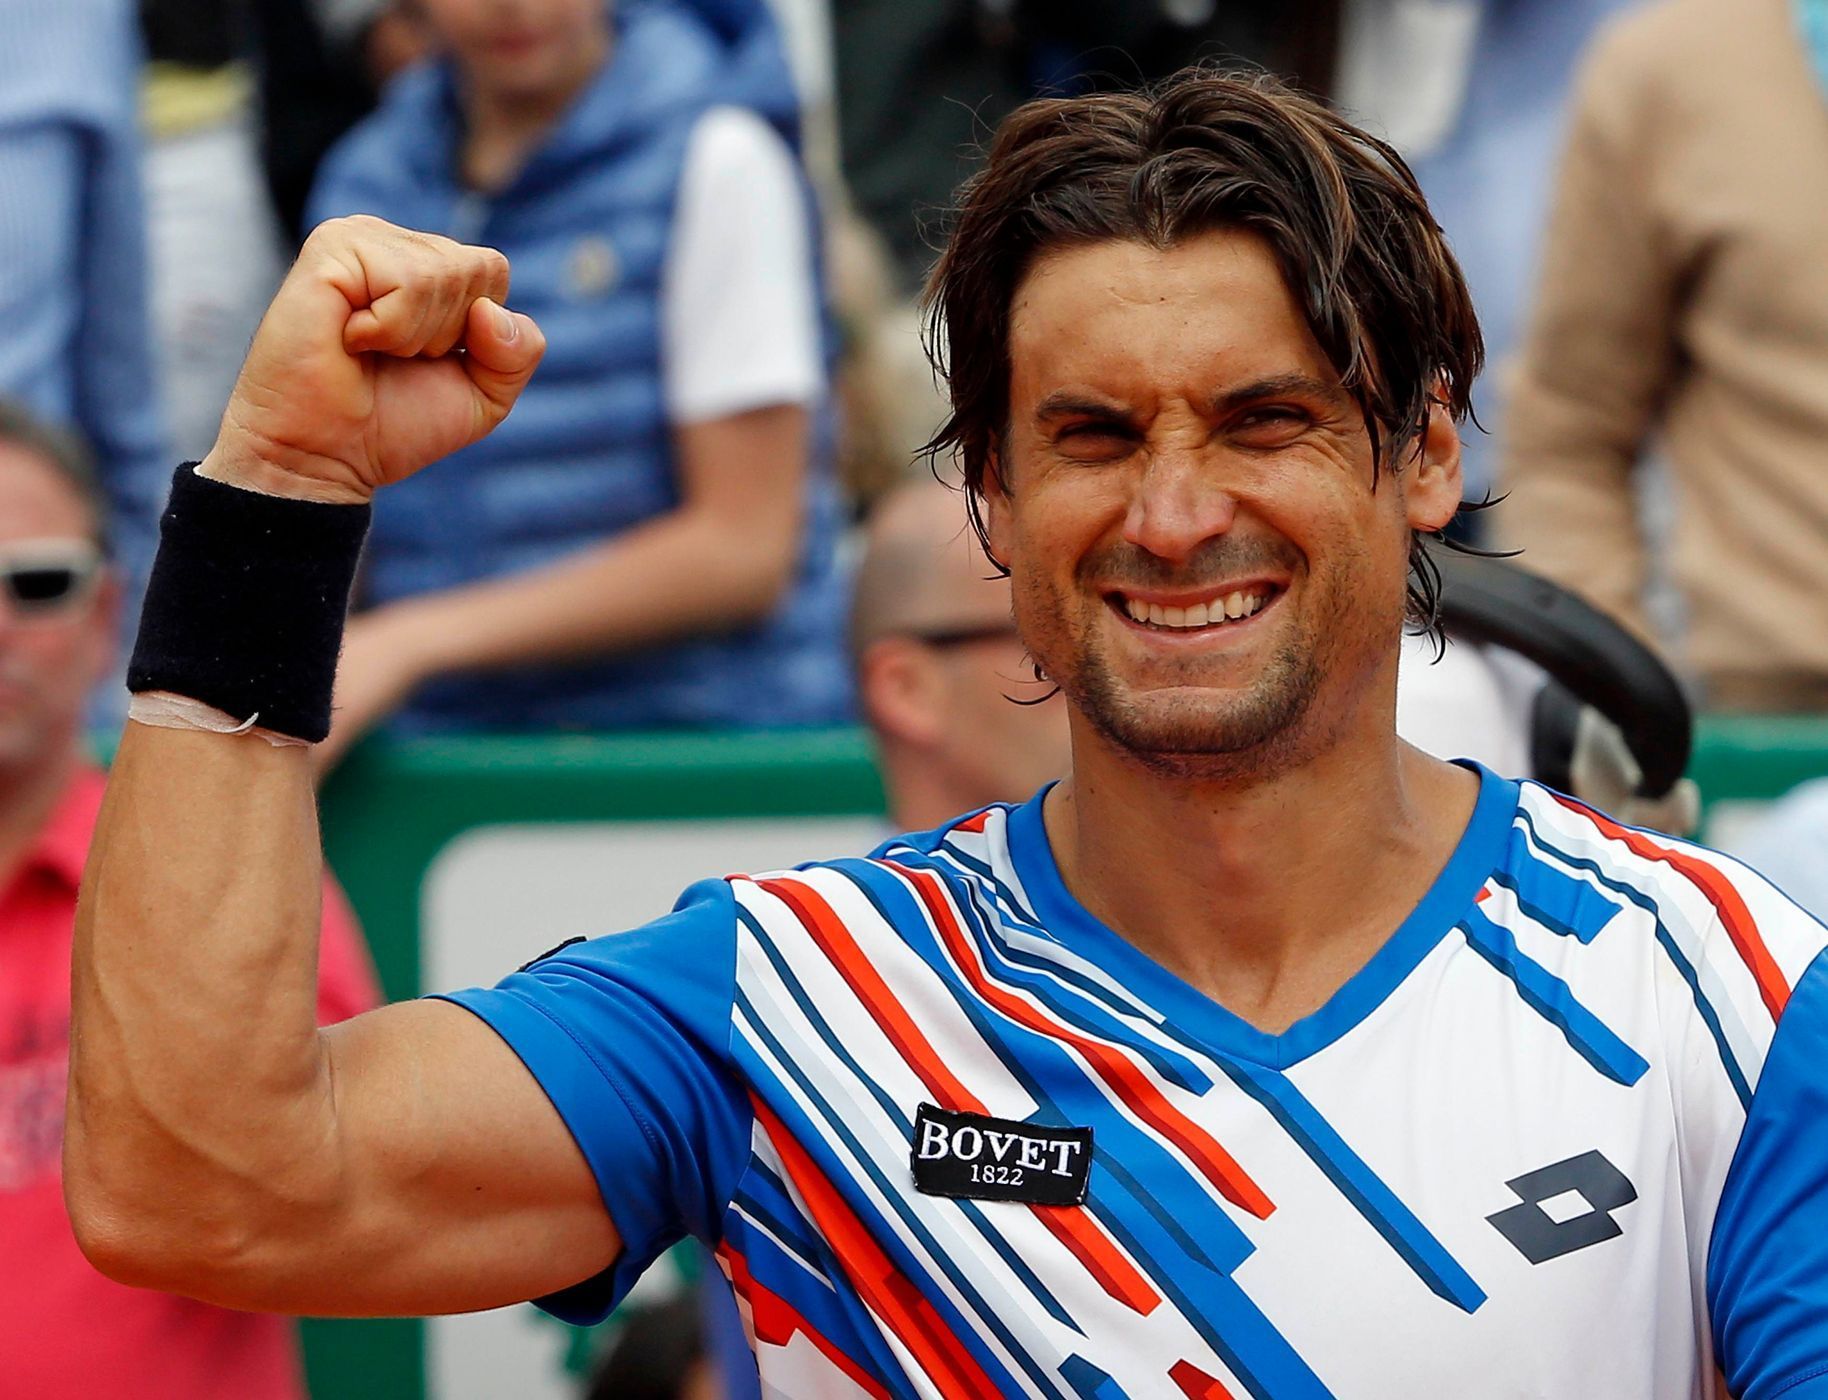 Ferrer of Spain celebrates after defeating his compatriot Rafael Nadal during their quarter-final match at the Monte Carlo Masters in Monaco